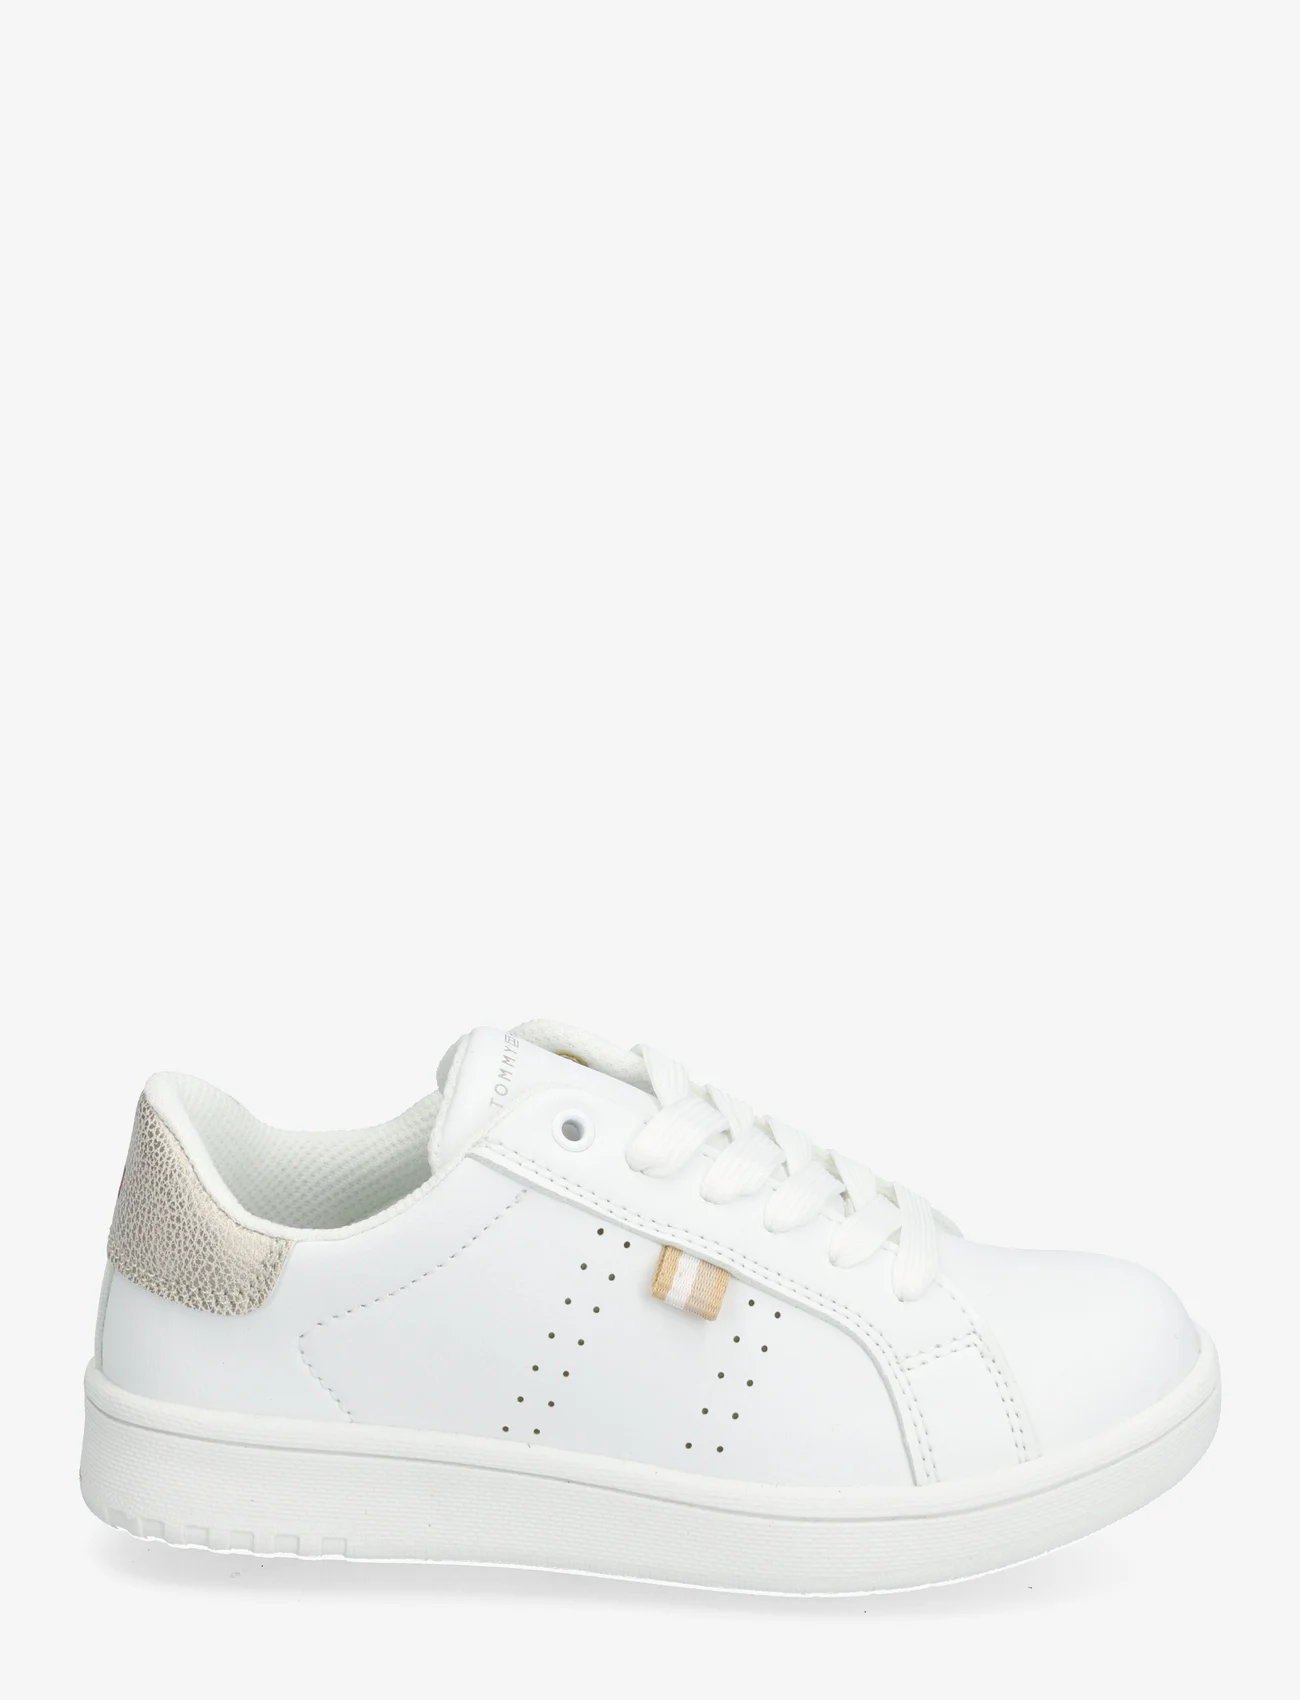 Tommy Hilfiger - LOW CUT LACE-UP SNEAKER - summer savings - white/platinum - 1